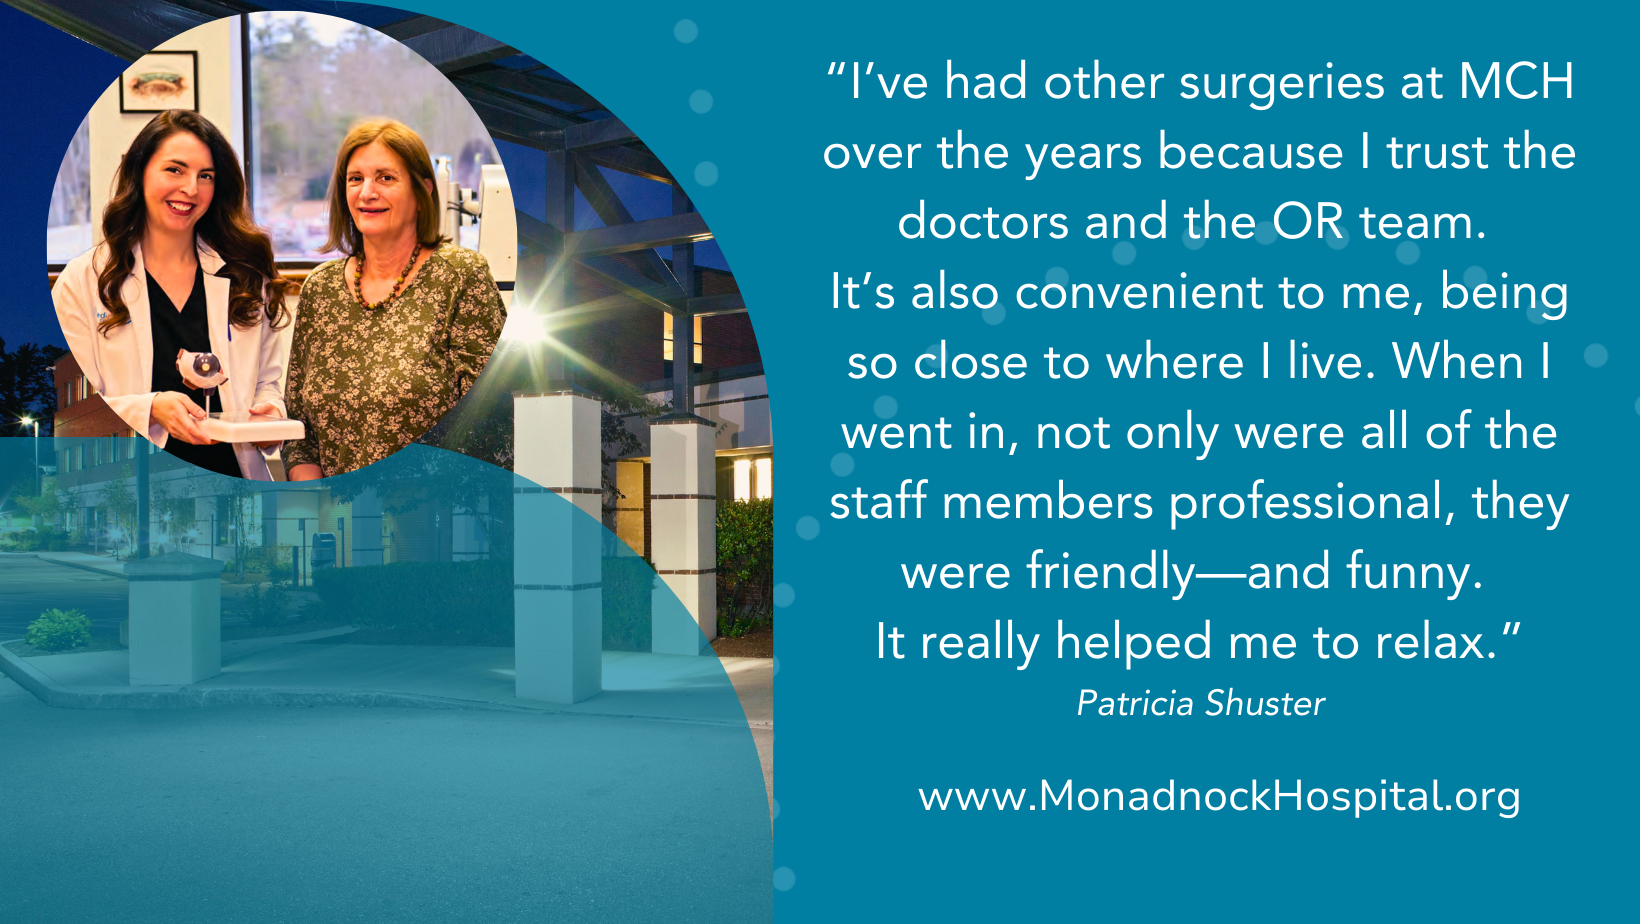 Patricia Shuster I’ve had other surgeries at MCH over the years because I trust the doctors and the OR team. It’s also convenient to me, being so close to where I live. When I went in, not only were all of the staff members professional, they were friendly—and funny. It really helped me to relax.